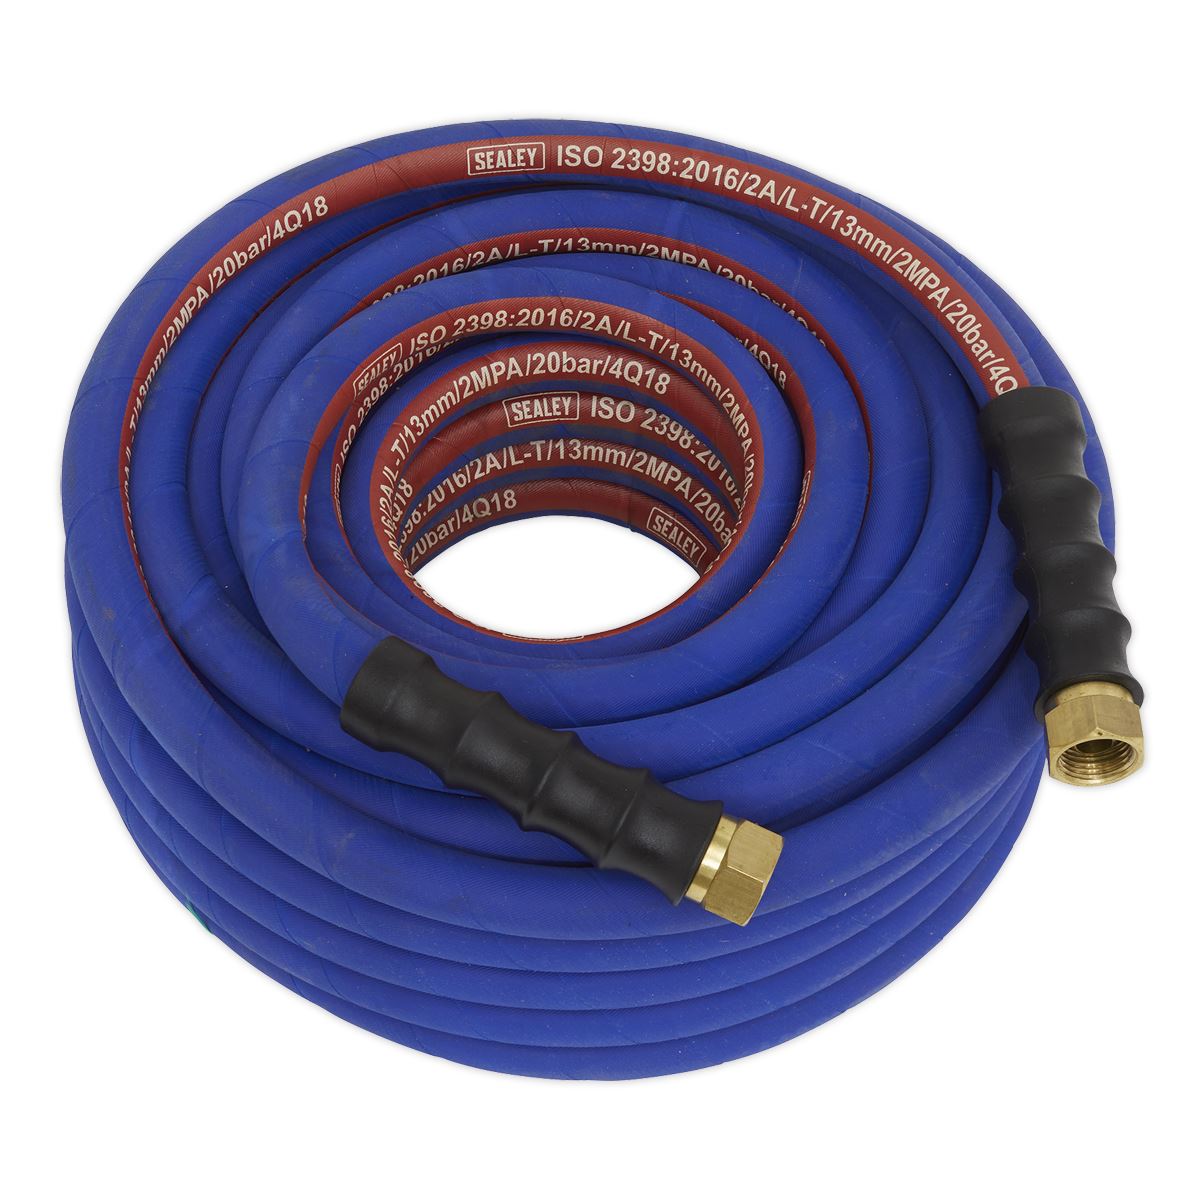 Sealey Air Hose 20m x Ø13mm with 1/2"BSP Unions Extra-Heavy-Duty